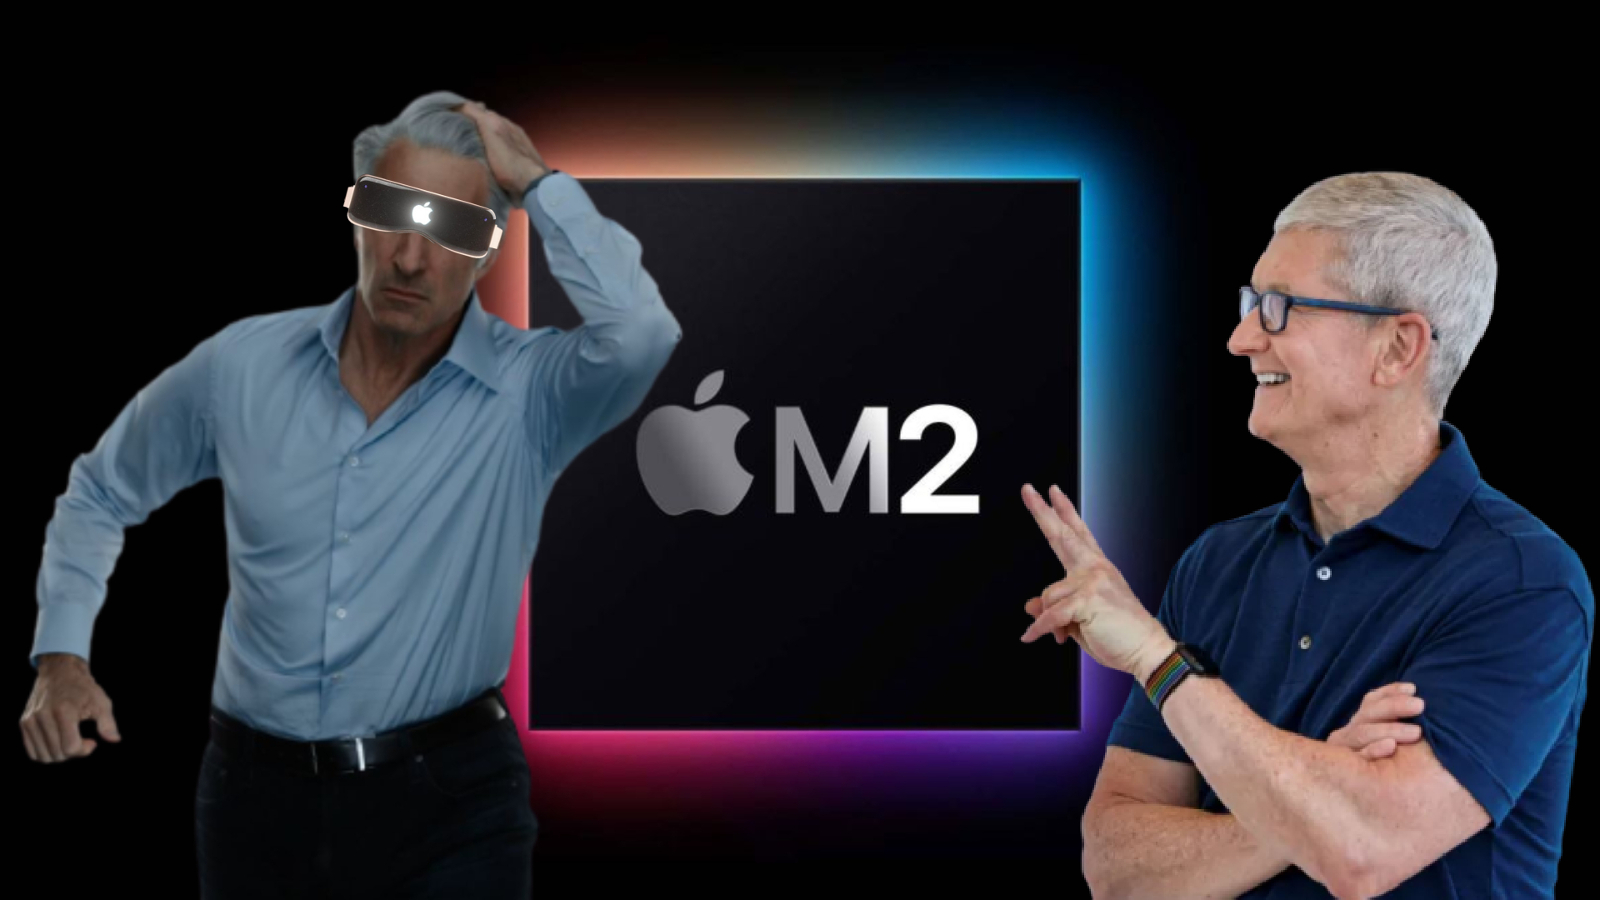 Apple VR/AR headset could be powered by the M2 CPU